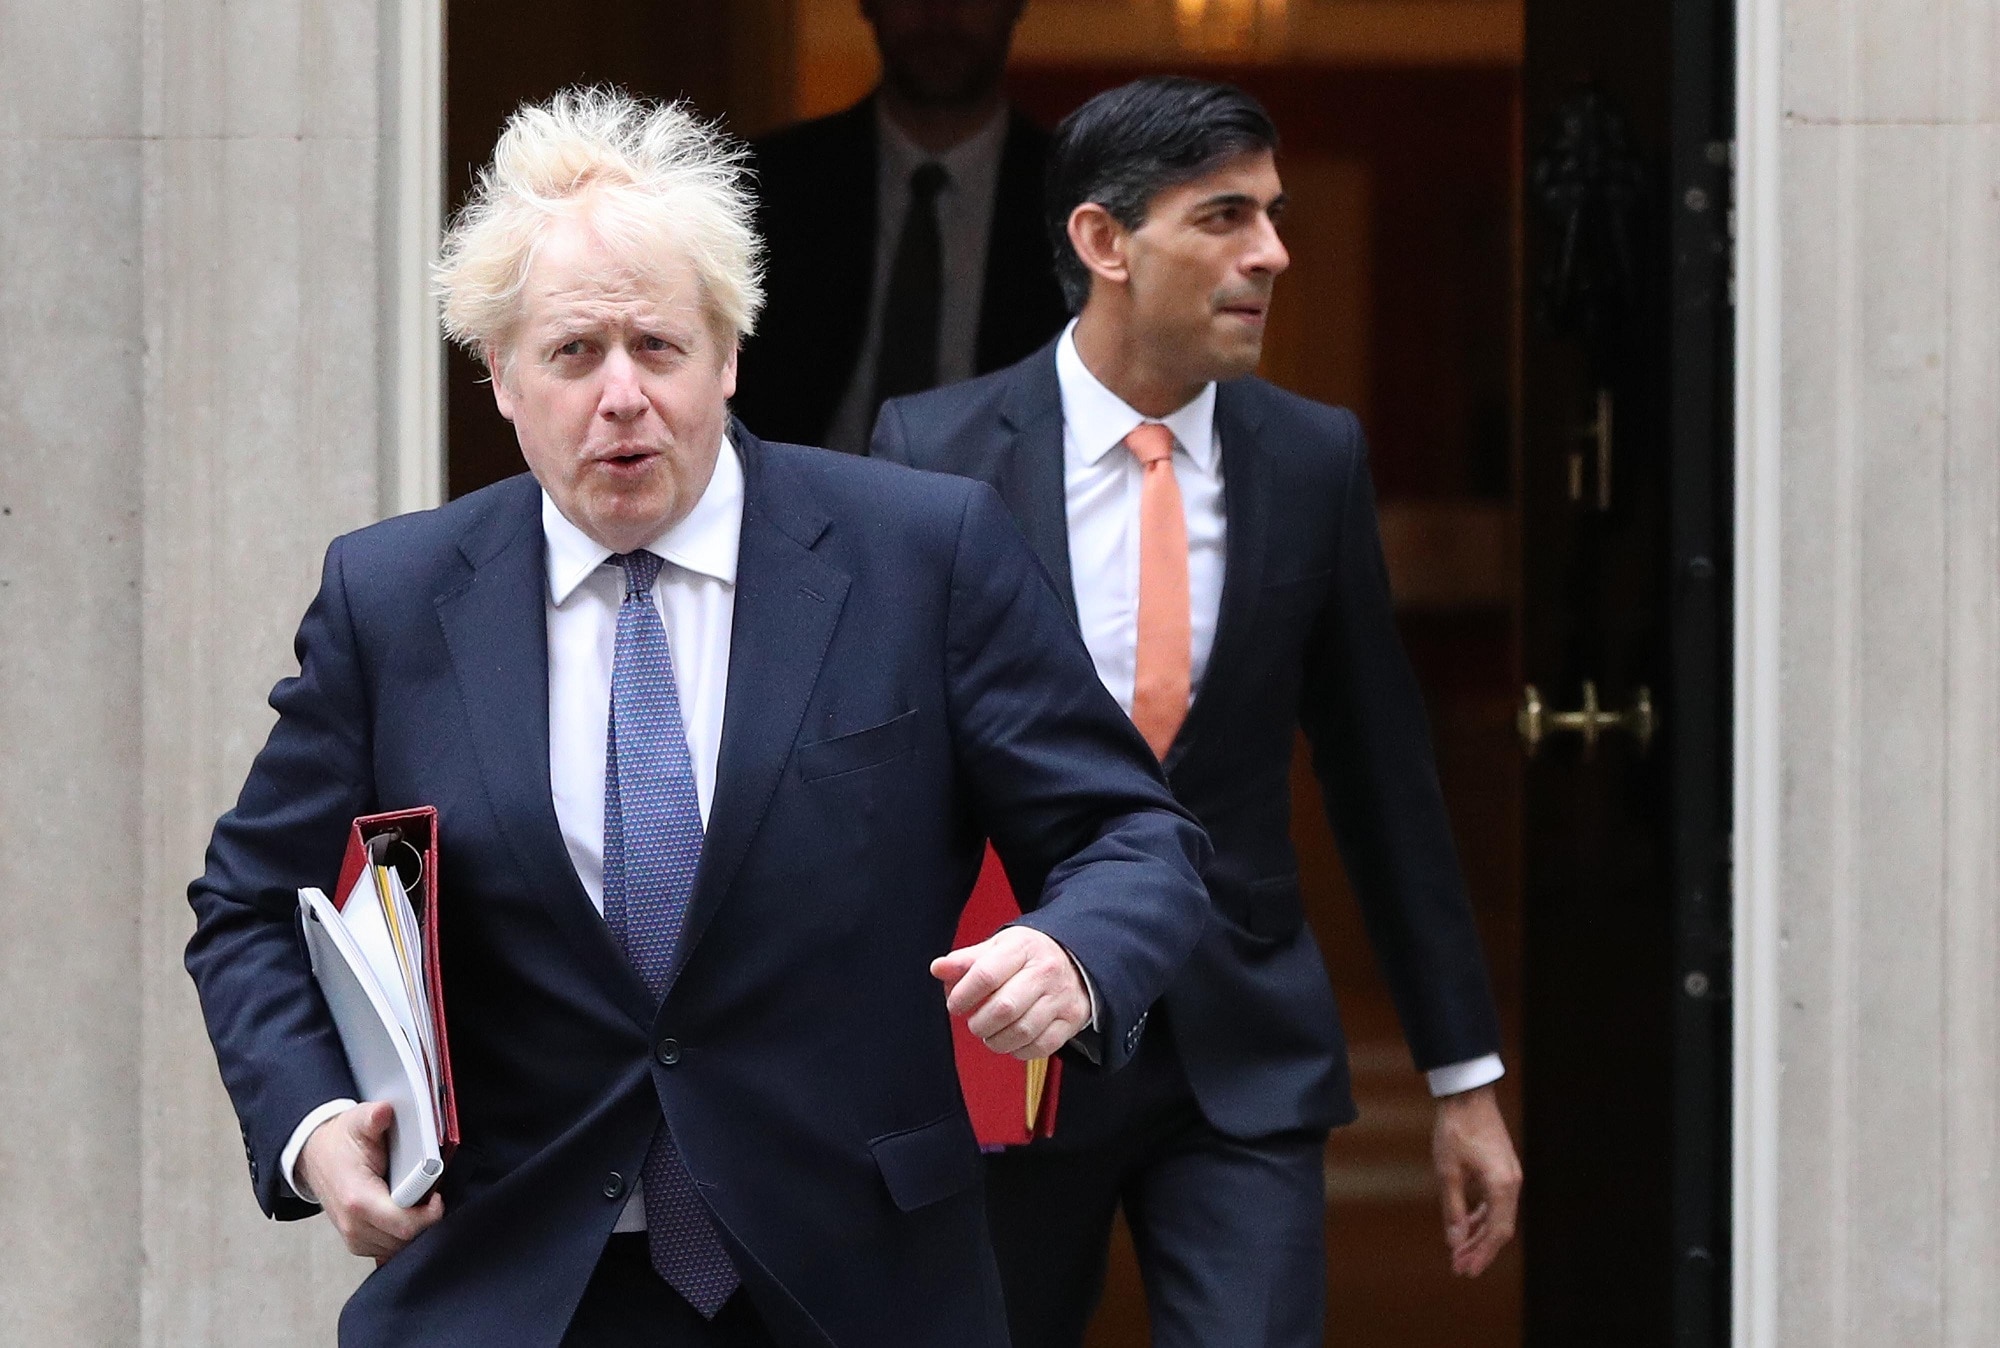 A file photo of Prime Minister Boris Johnson (left) and Chancellor of the Exchequer Rishi Sunak taken on 13 October 2020. 